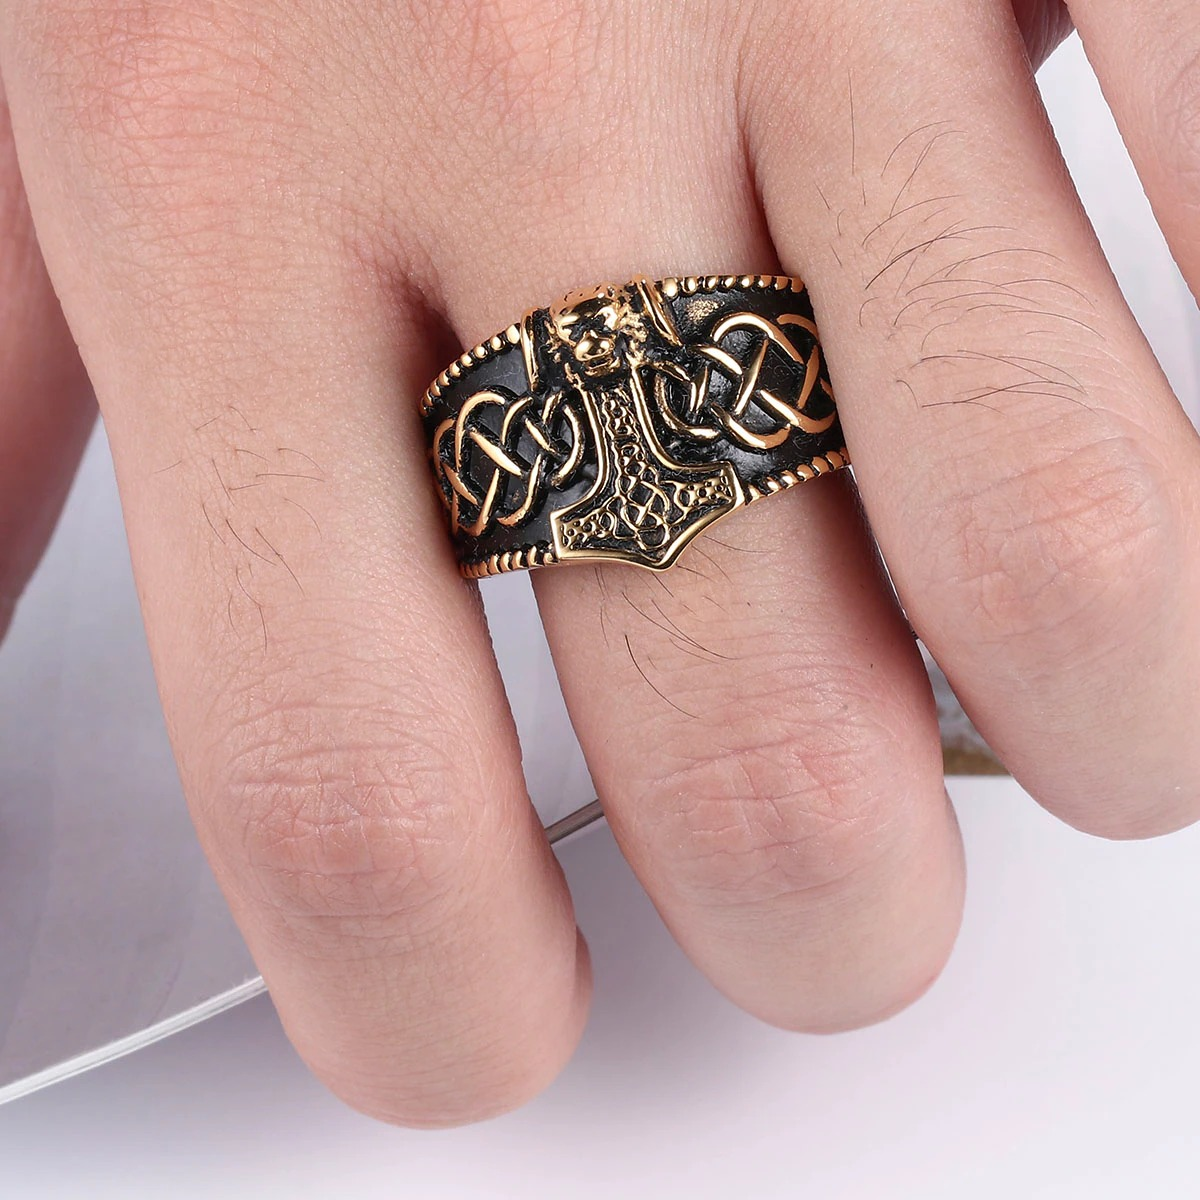 Male Thor's Hammer Celtic Ring / Fashion Men's Stainless Steel Rings / Amulet Jewelry for Men - HARD'N'HEAVY